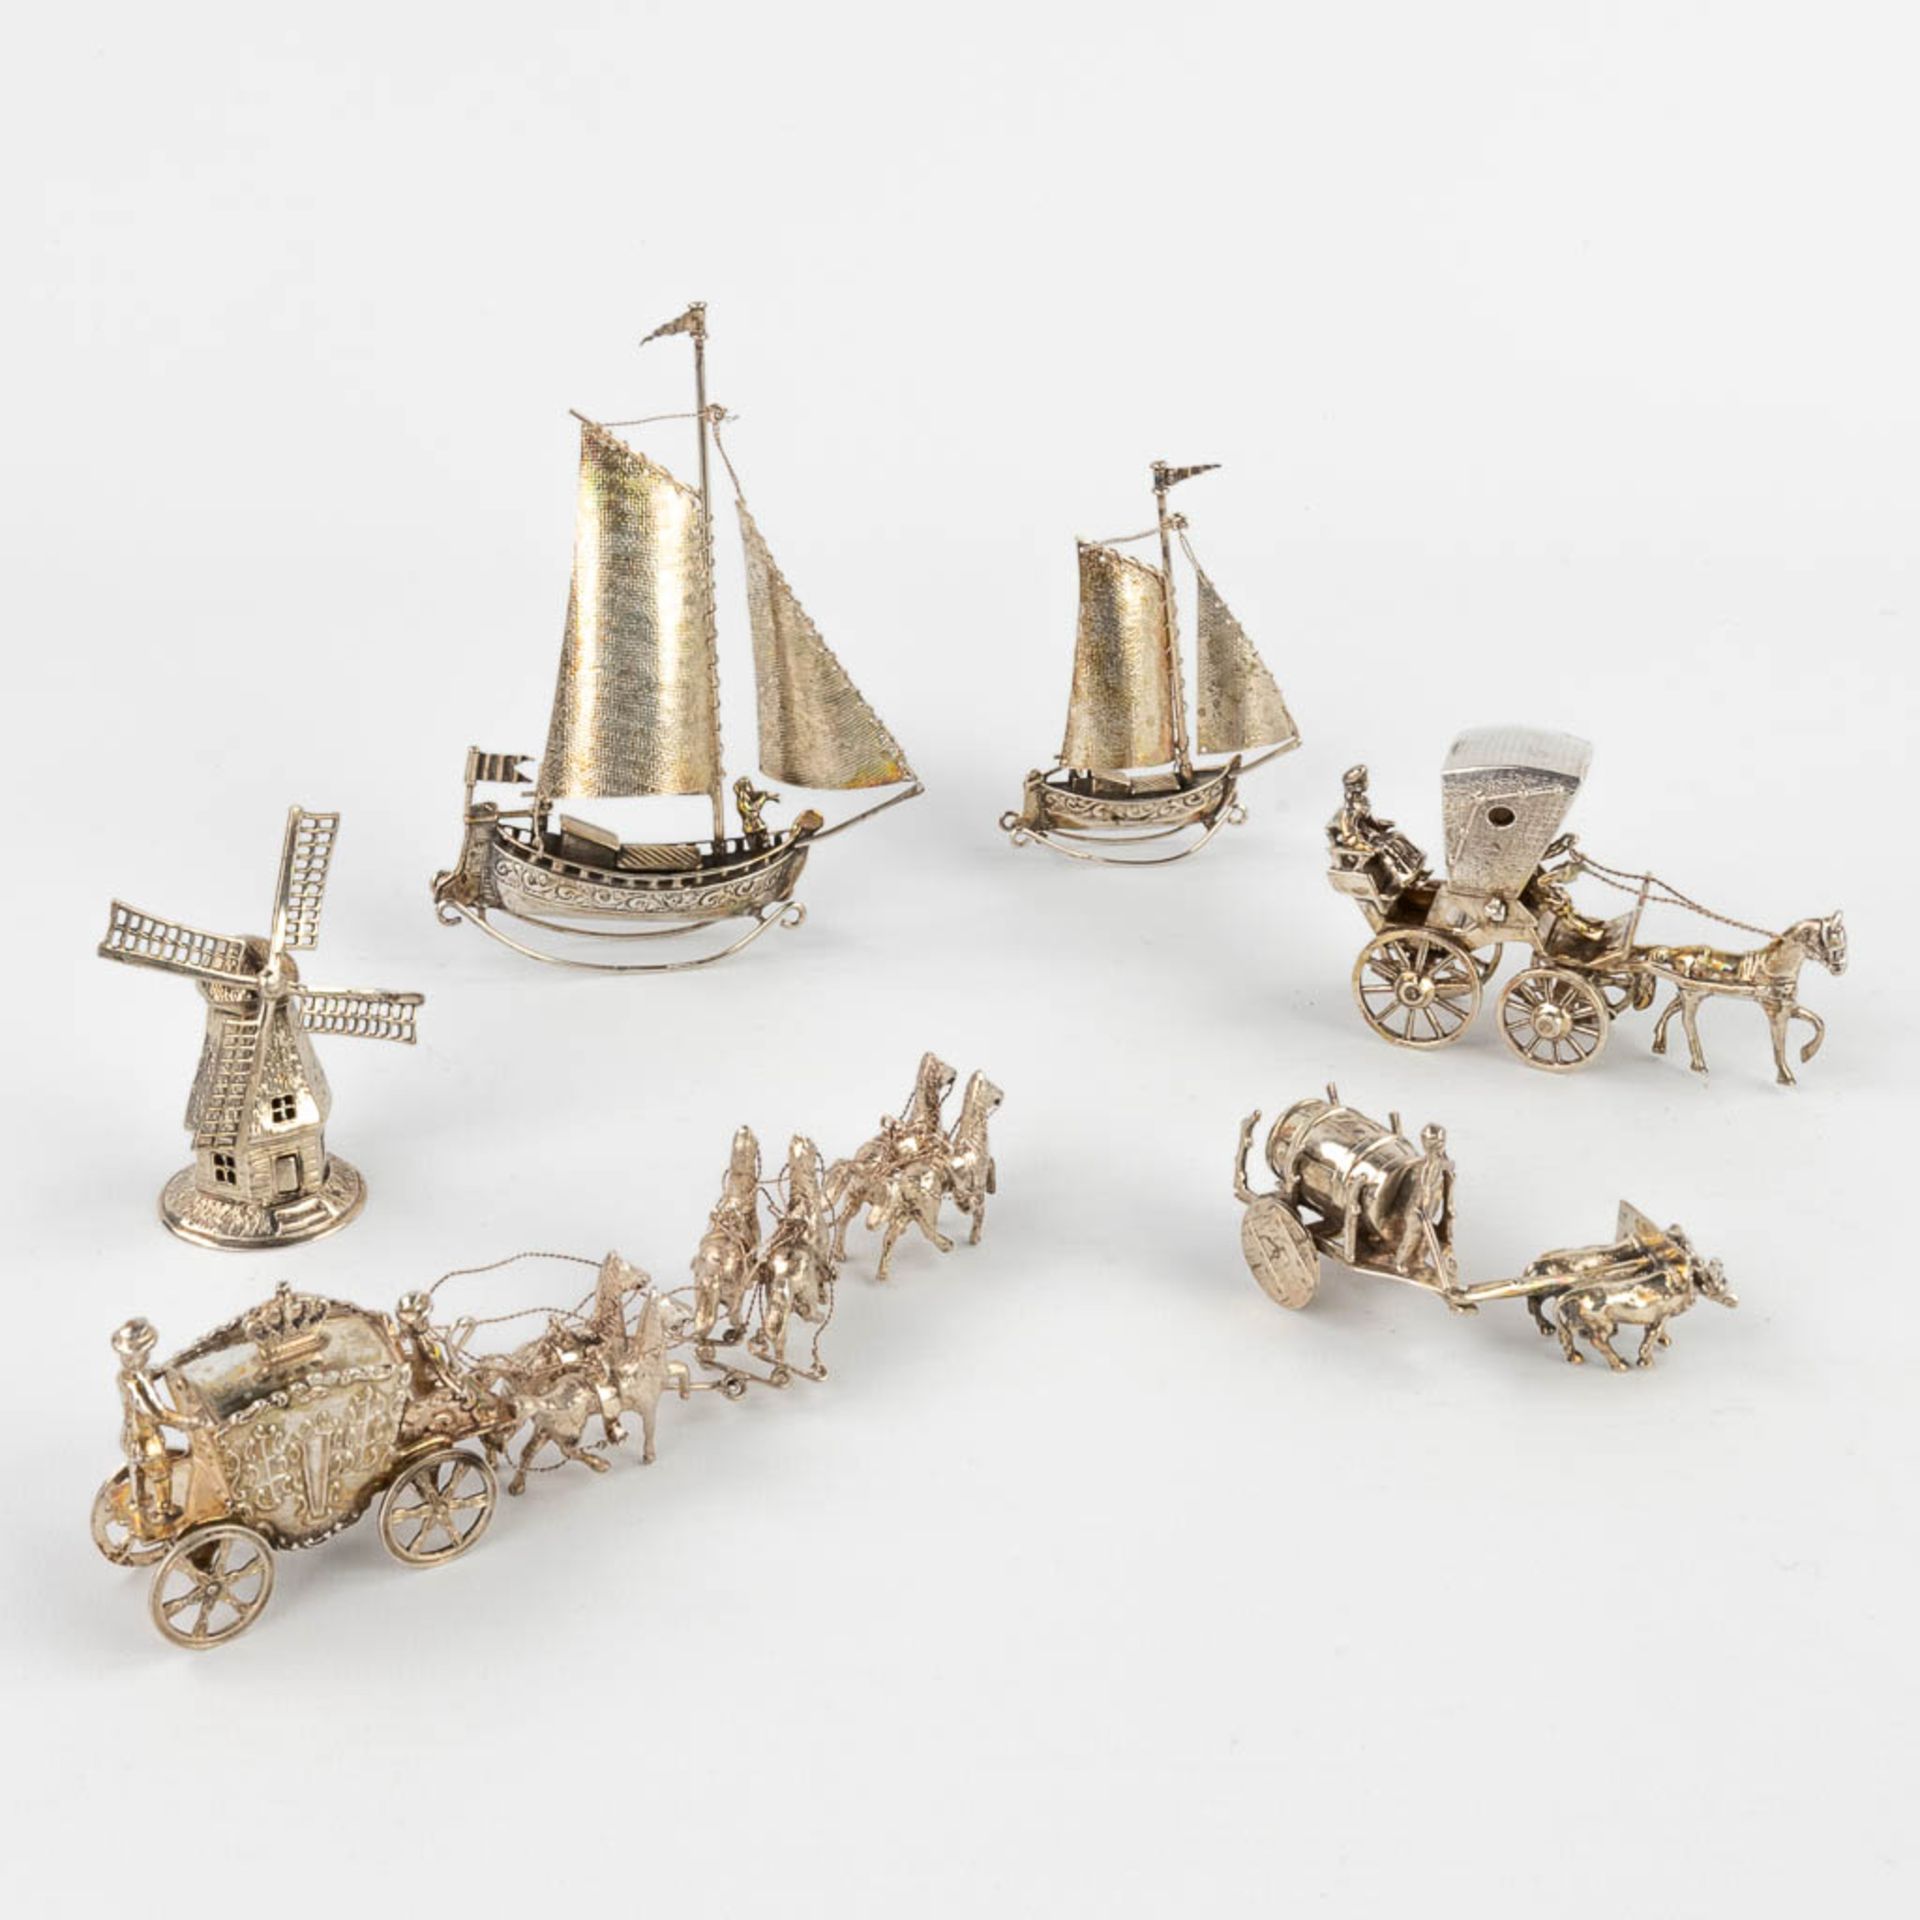 A windmill, 2 horse-drawn carriages, a farmer's cart, 2 sailboats, silver. Marked 835. 374,60g. (H: